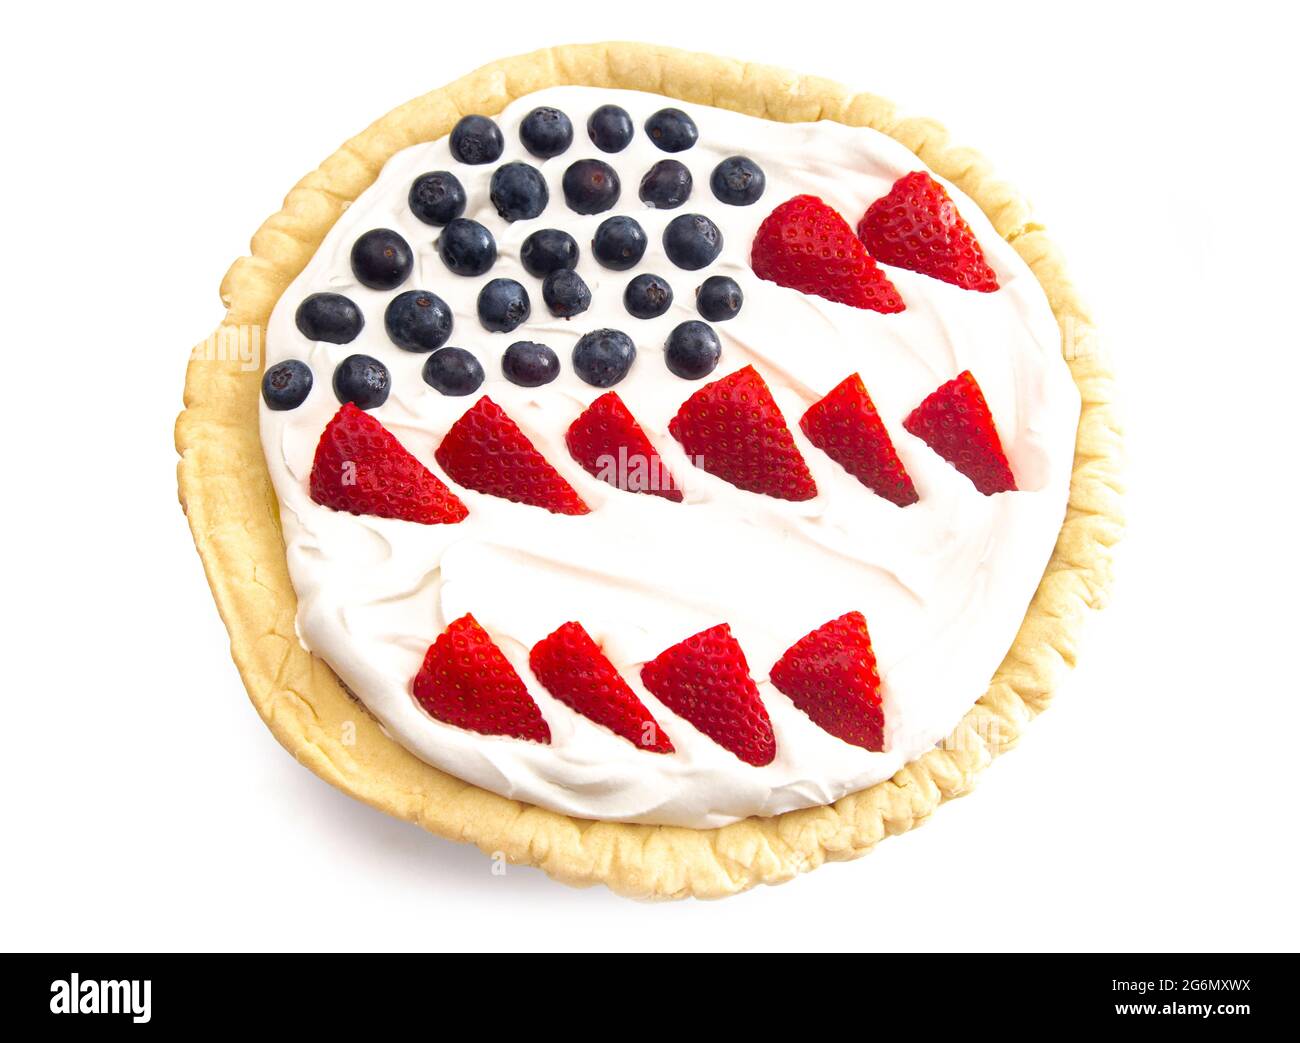 A Pie in the Shape of the American Flag for a Patriotic Celebration Stock Photo